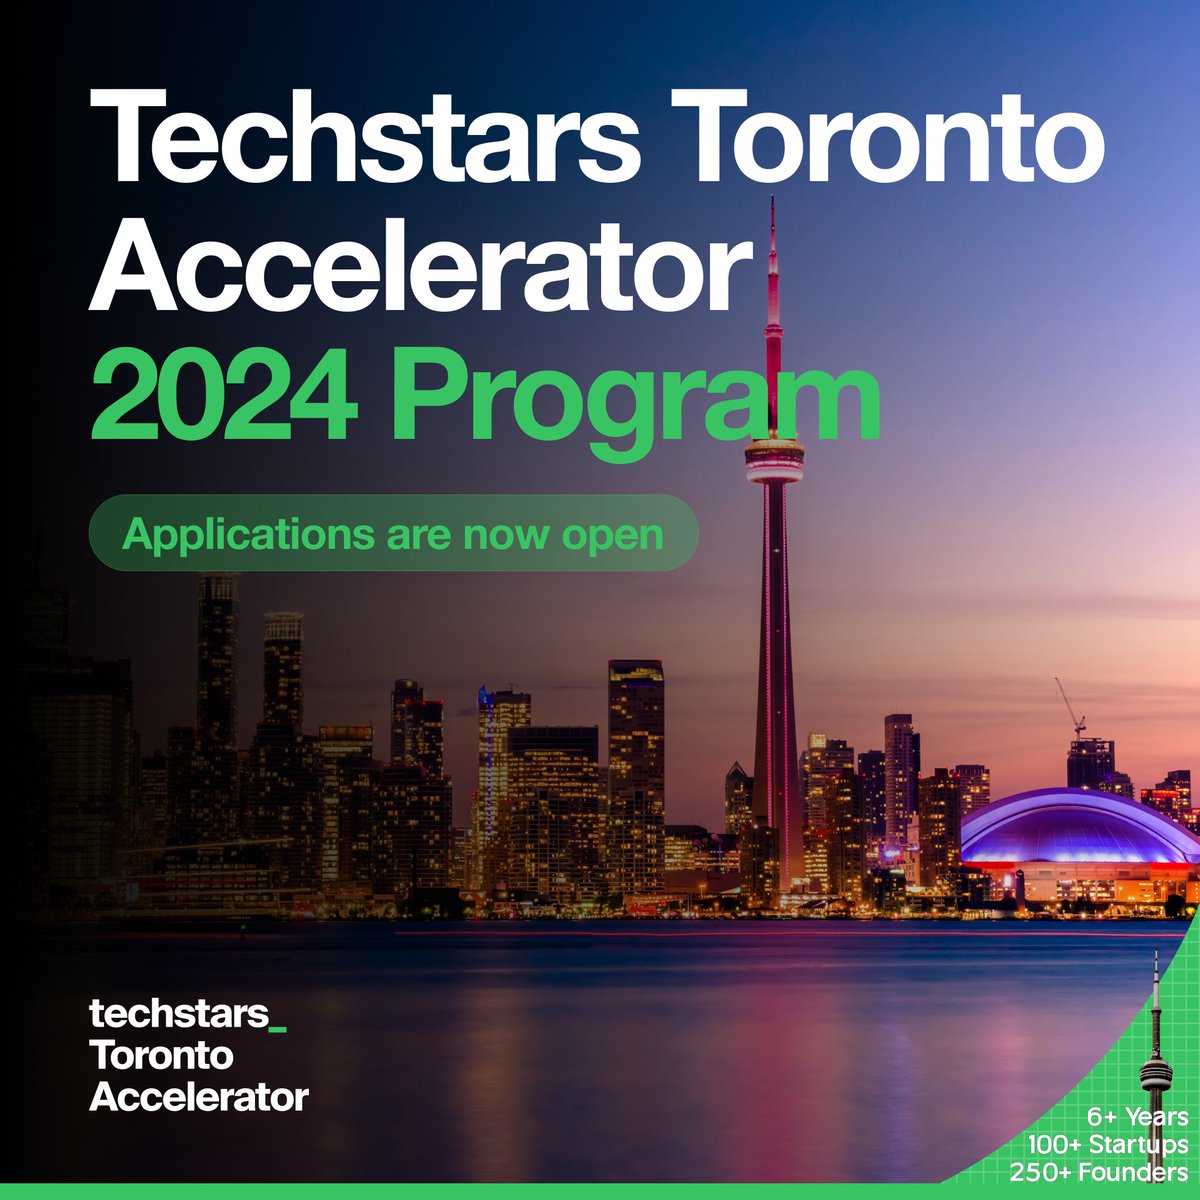 🚀 Exciting News!

Applications for @TS_Toronto Accelerator 2024 are officially Open.   

Apply now and join our global network of innovators!  
techstars.com/accelerators/t…
#techstars #toronto #givefirst